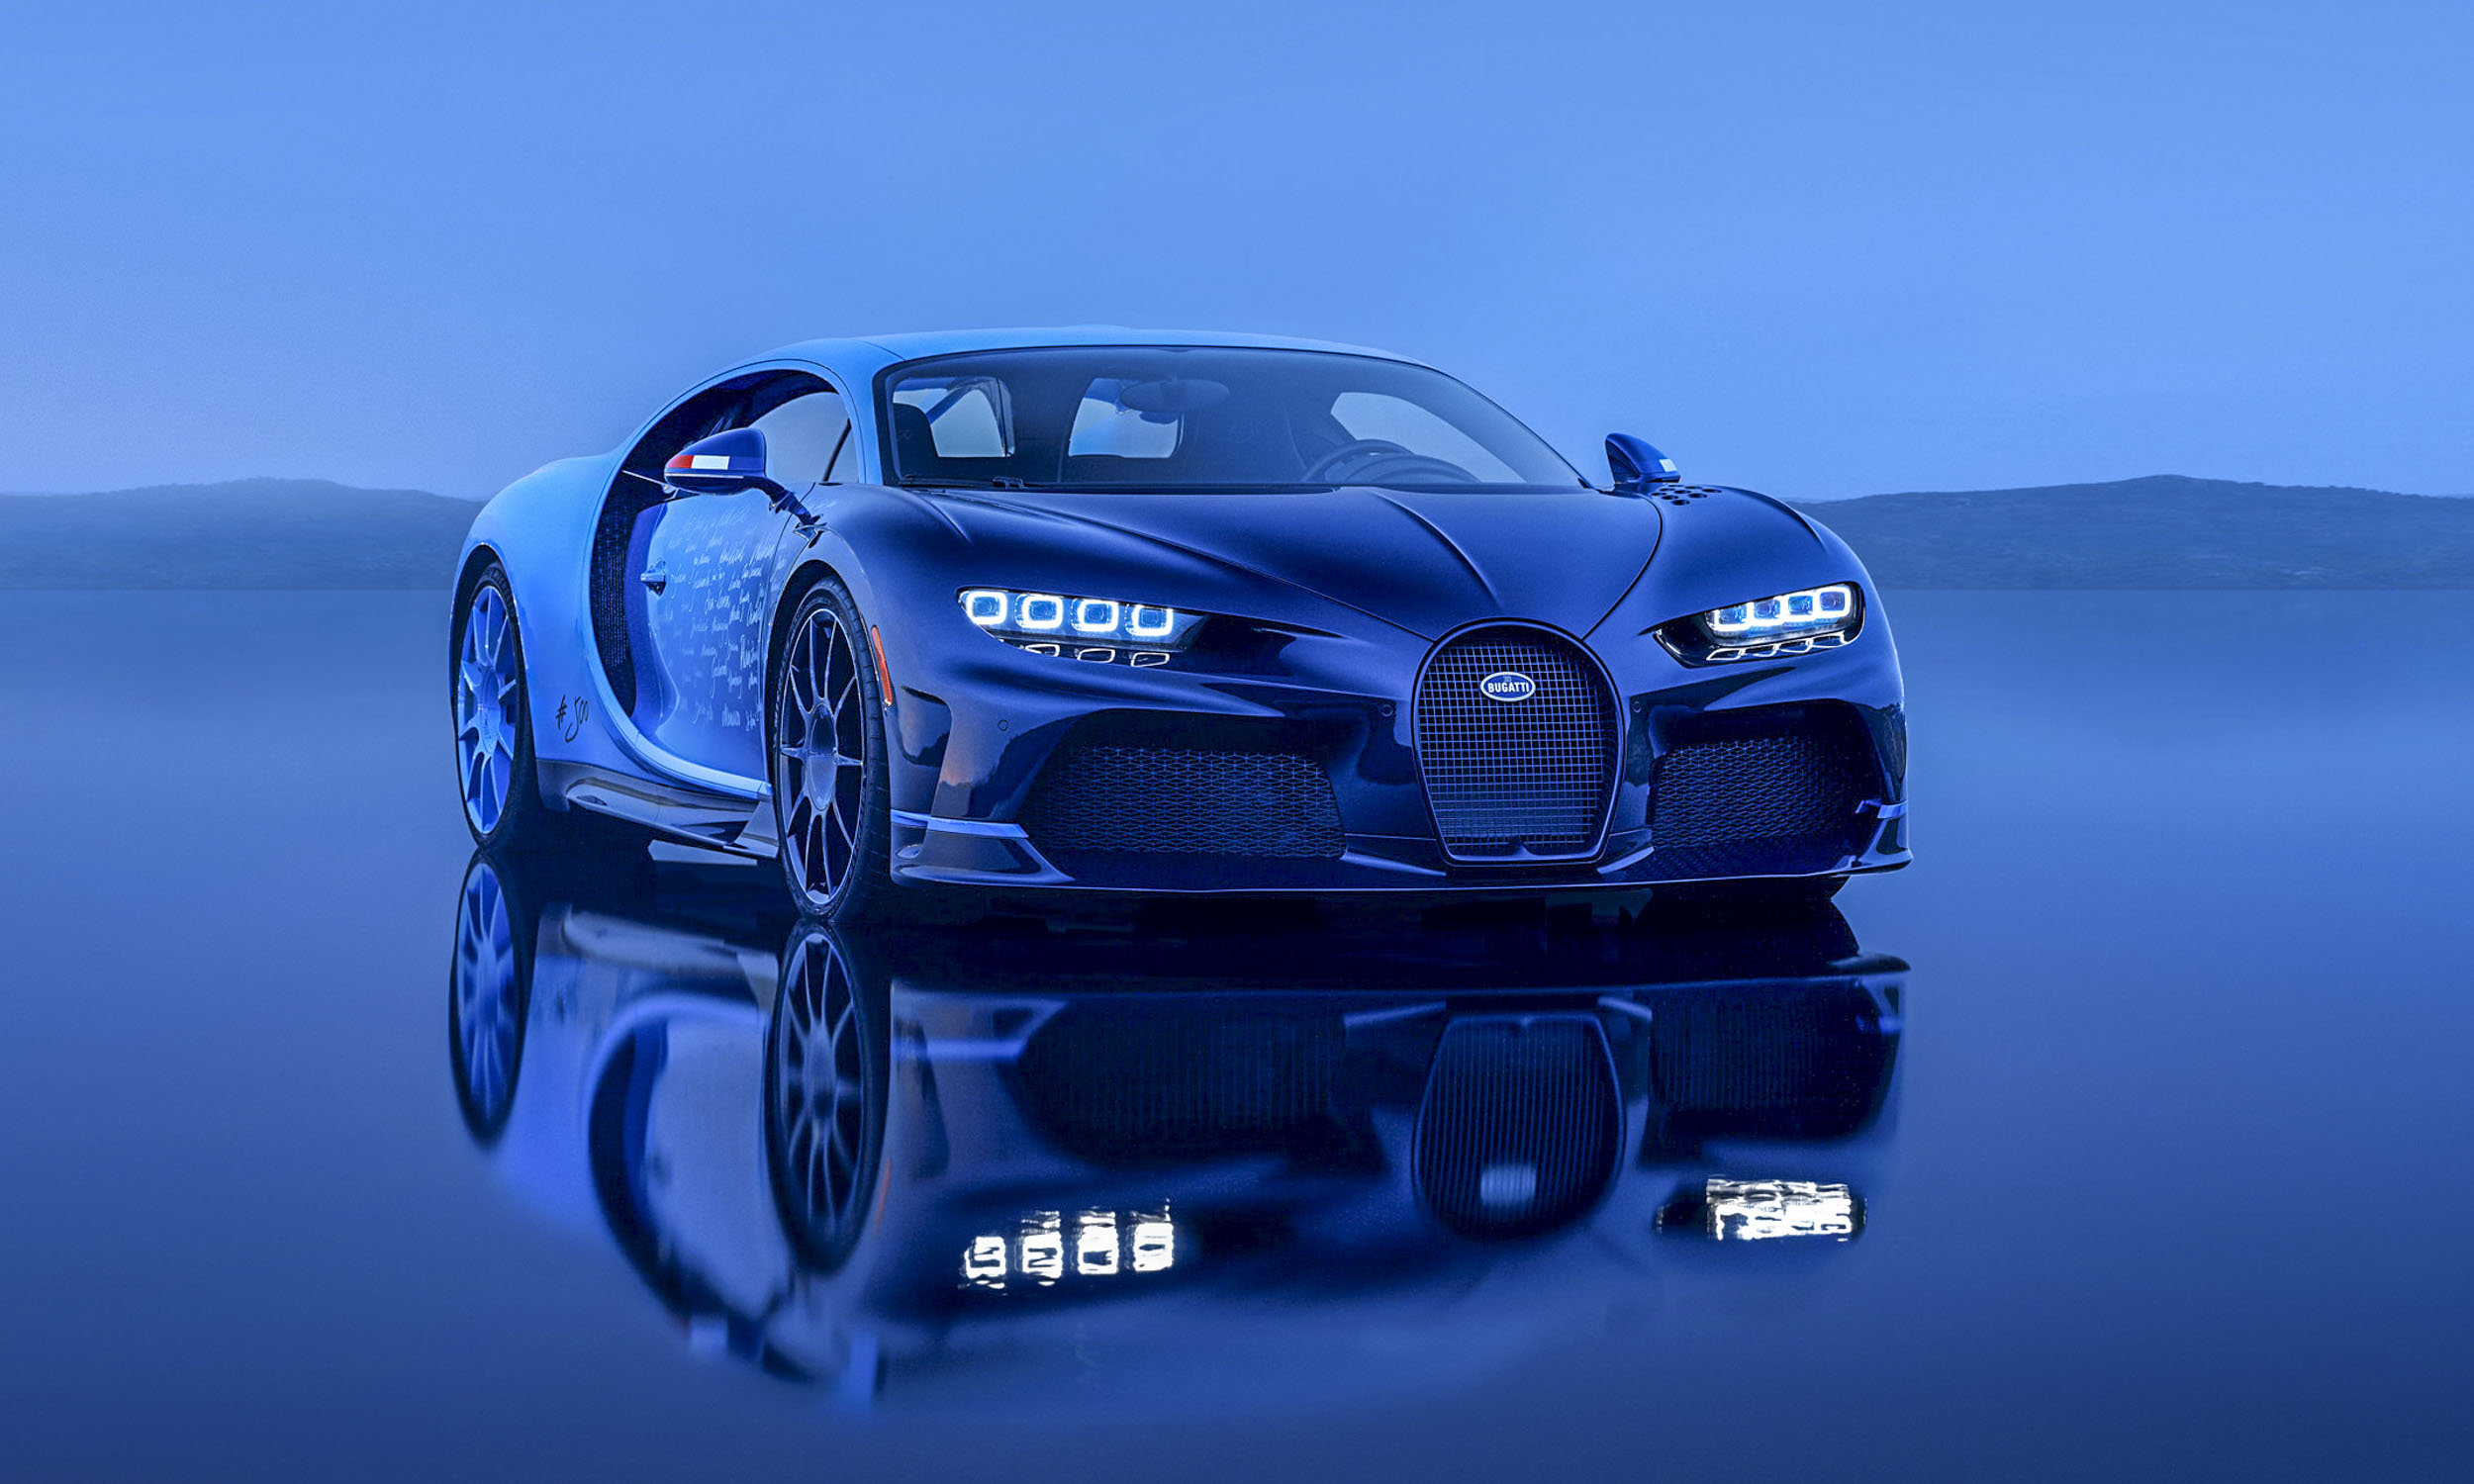 <p>          In 2015, Bugatti announced the end of one of the most extreme sports cars ever to be built – the Veyron. At the time, it was hard to fathom how the French car company could top the outgoing 1,200-horsepower Veyron. But in 2016, at the Geneva Motor Show, Bugatti took the wraps of its next super sports car, the Chiron, and it was a worthy successor. Only 500 copies were to be built, and now number five hundred has been produced – the L’Ultime. One can’t help but wonder what will come next.         </p>